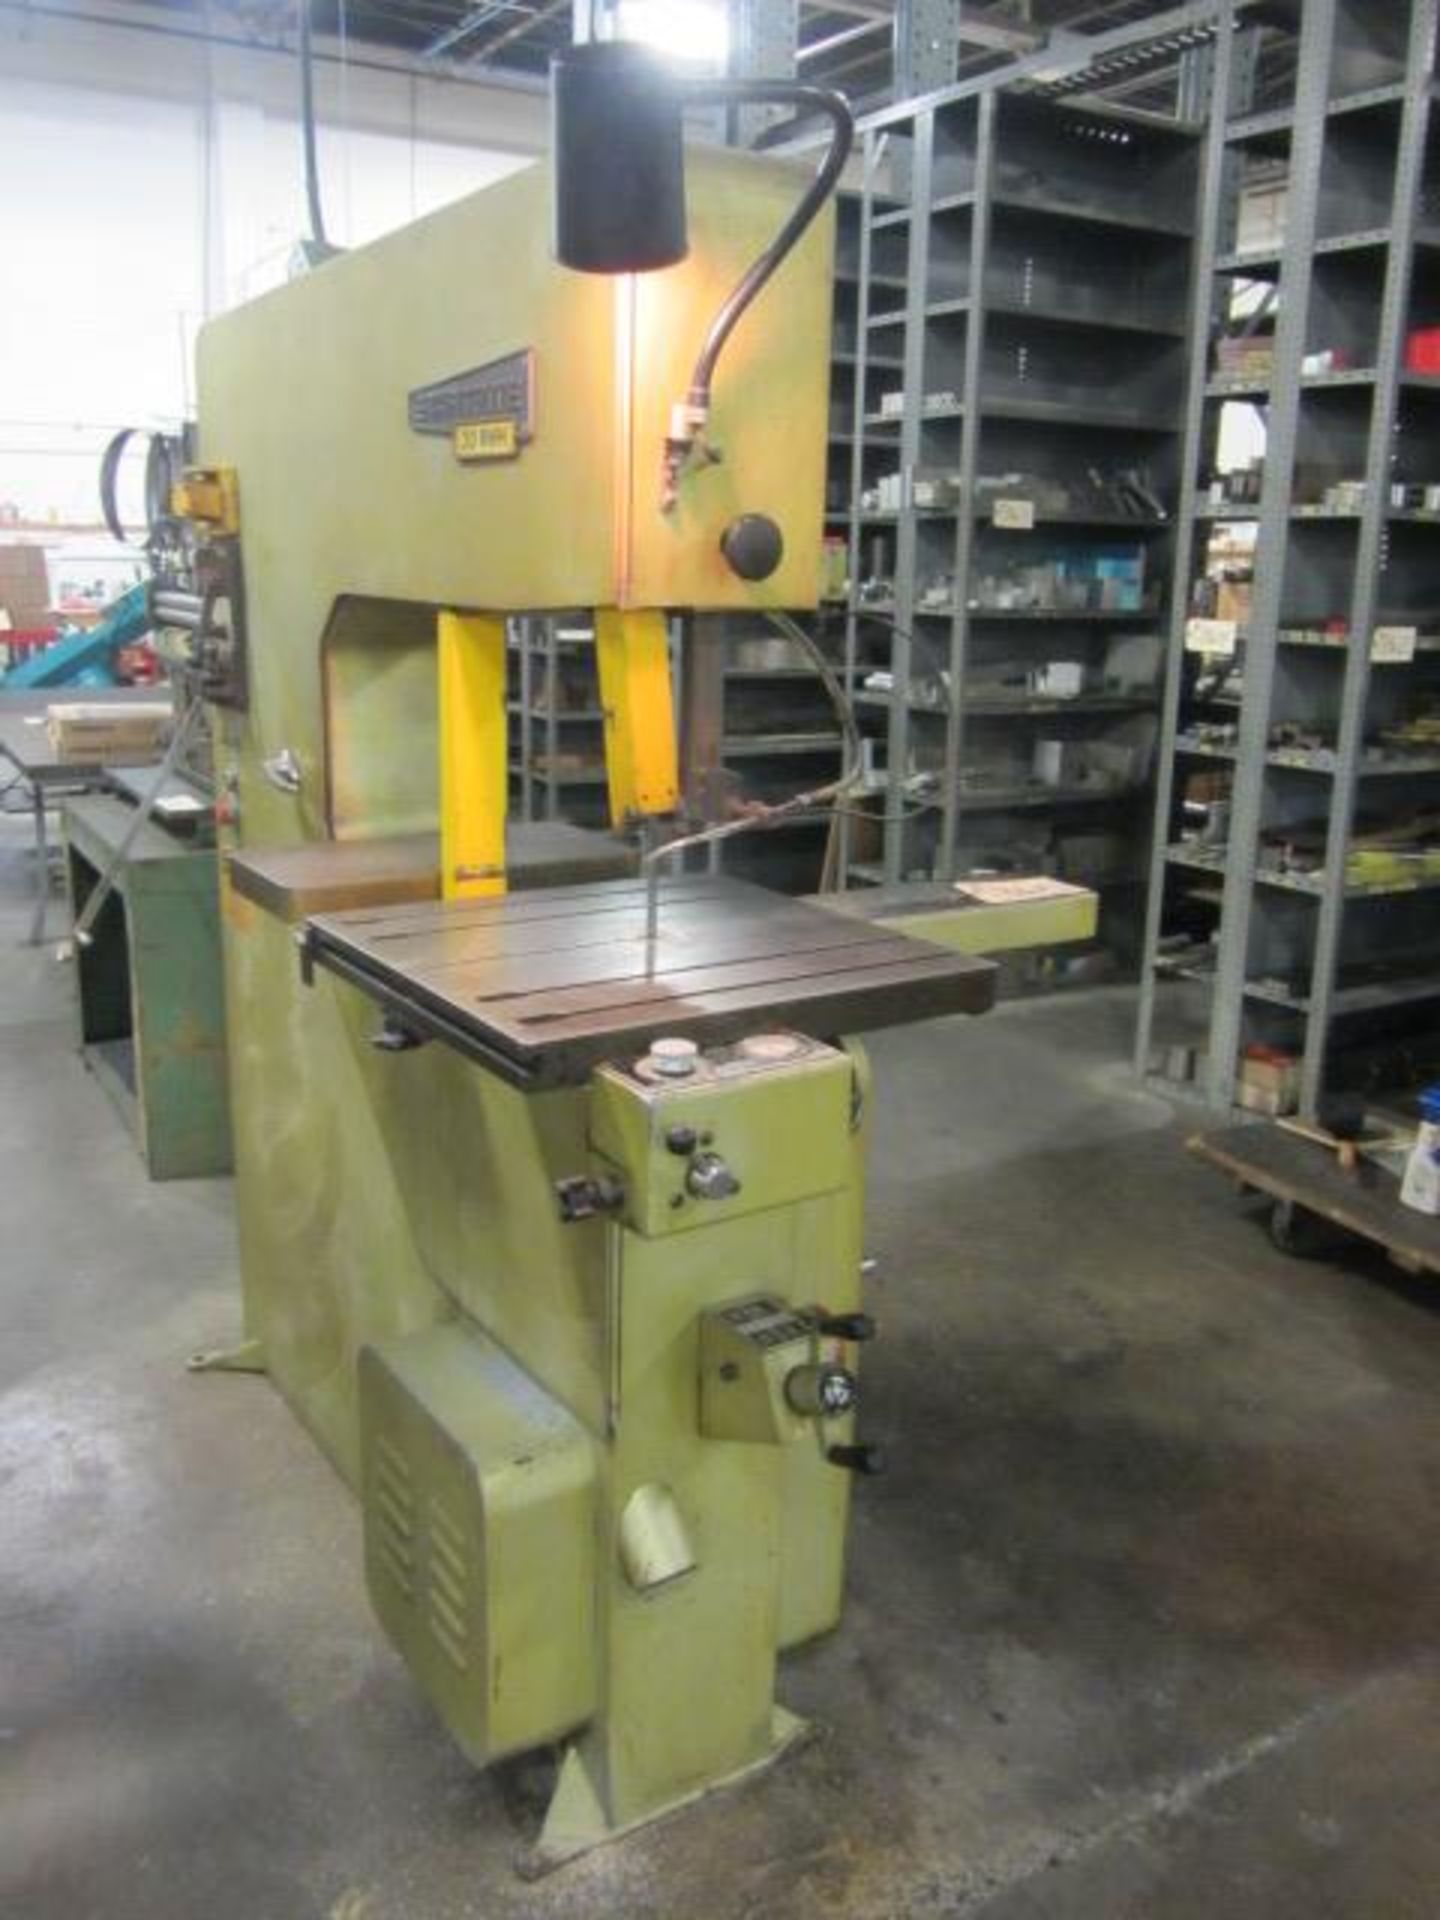 Startrite 30RWH 30'' Vertical Bandsaw with 20'' x 20'' Hydraulic Feed Table, Variable Spindle - Image 6 of 7